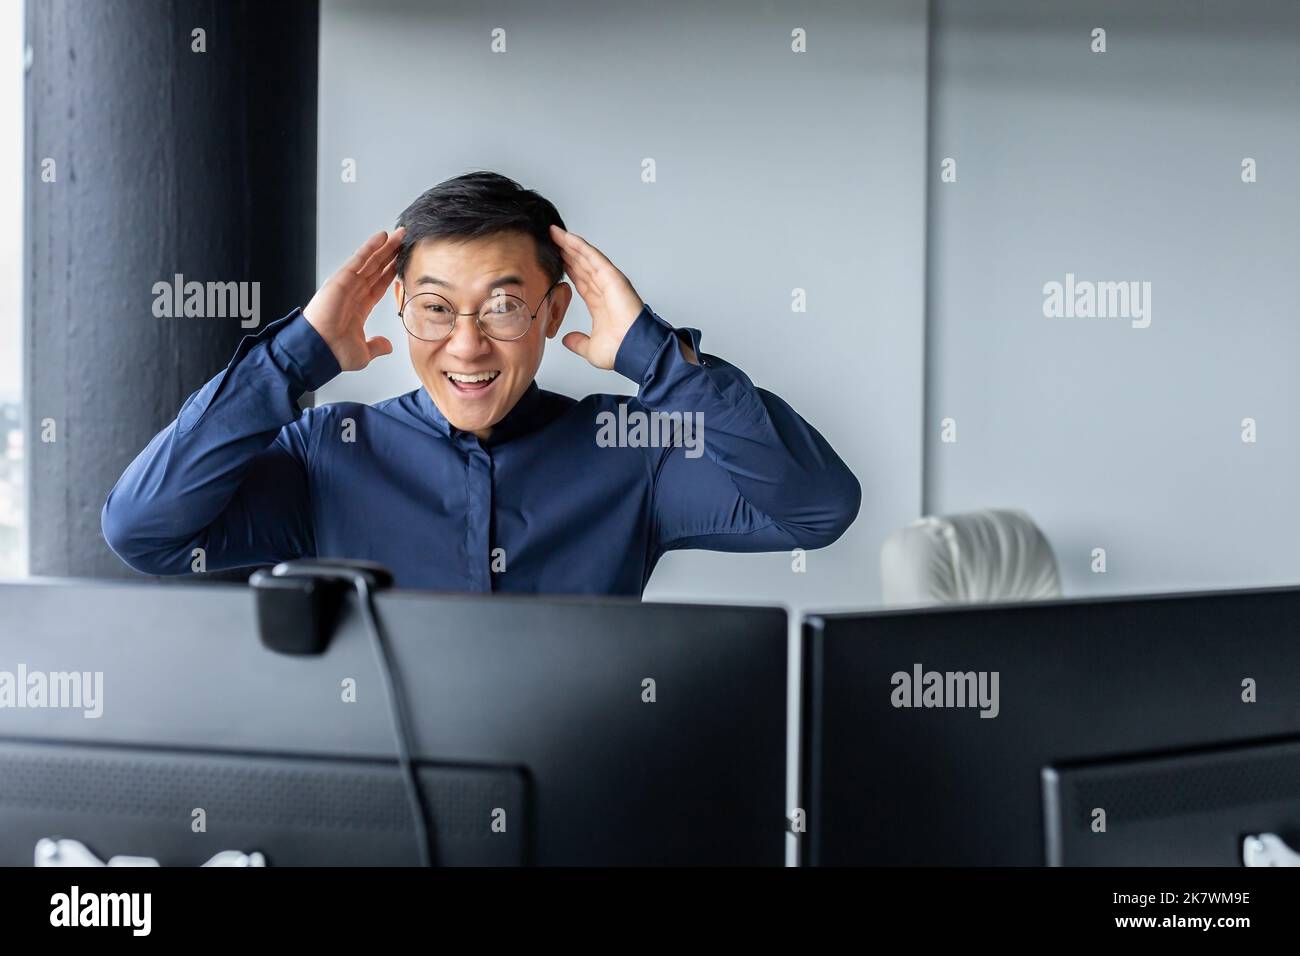 Happy business broker looking at two paired computer monitors and happy, businessman working inside modern office building, asian man celebrating successful deal and signed contract. Stock Photo